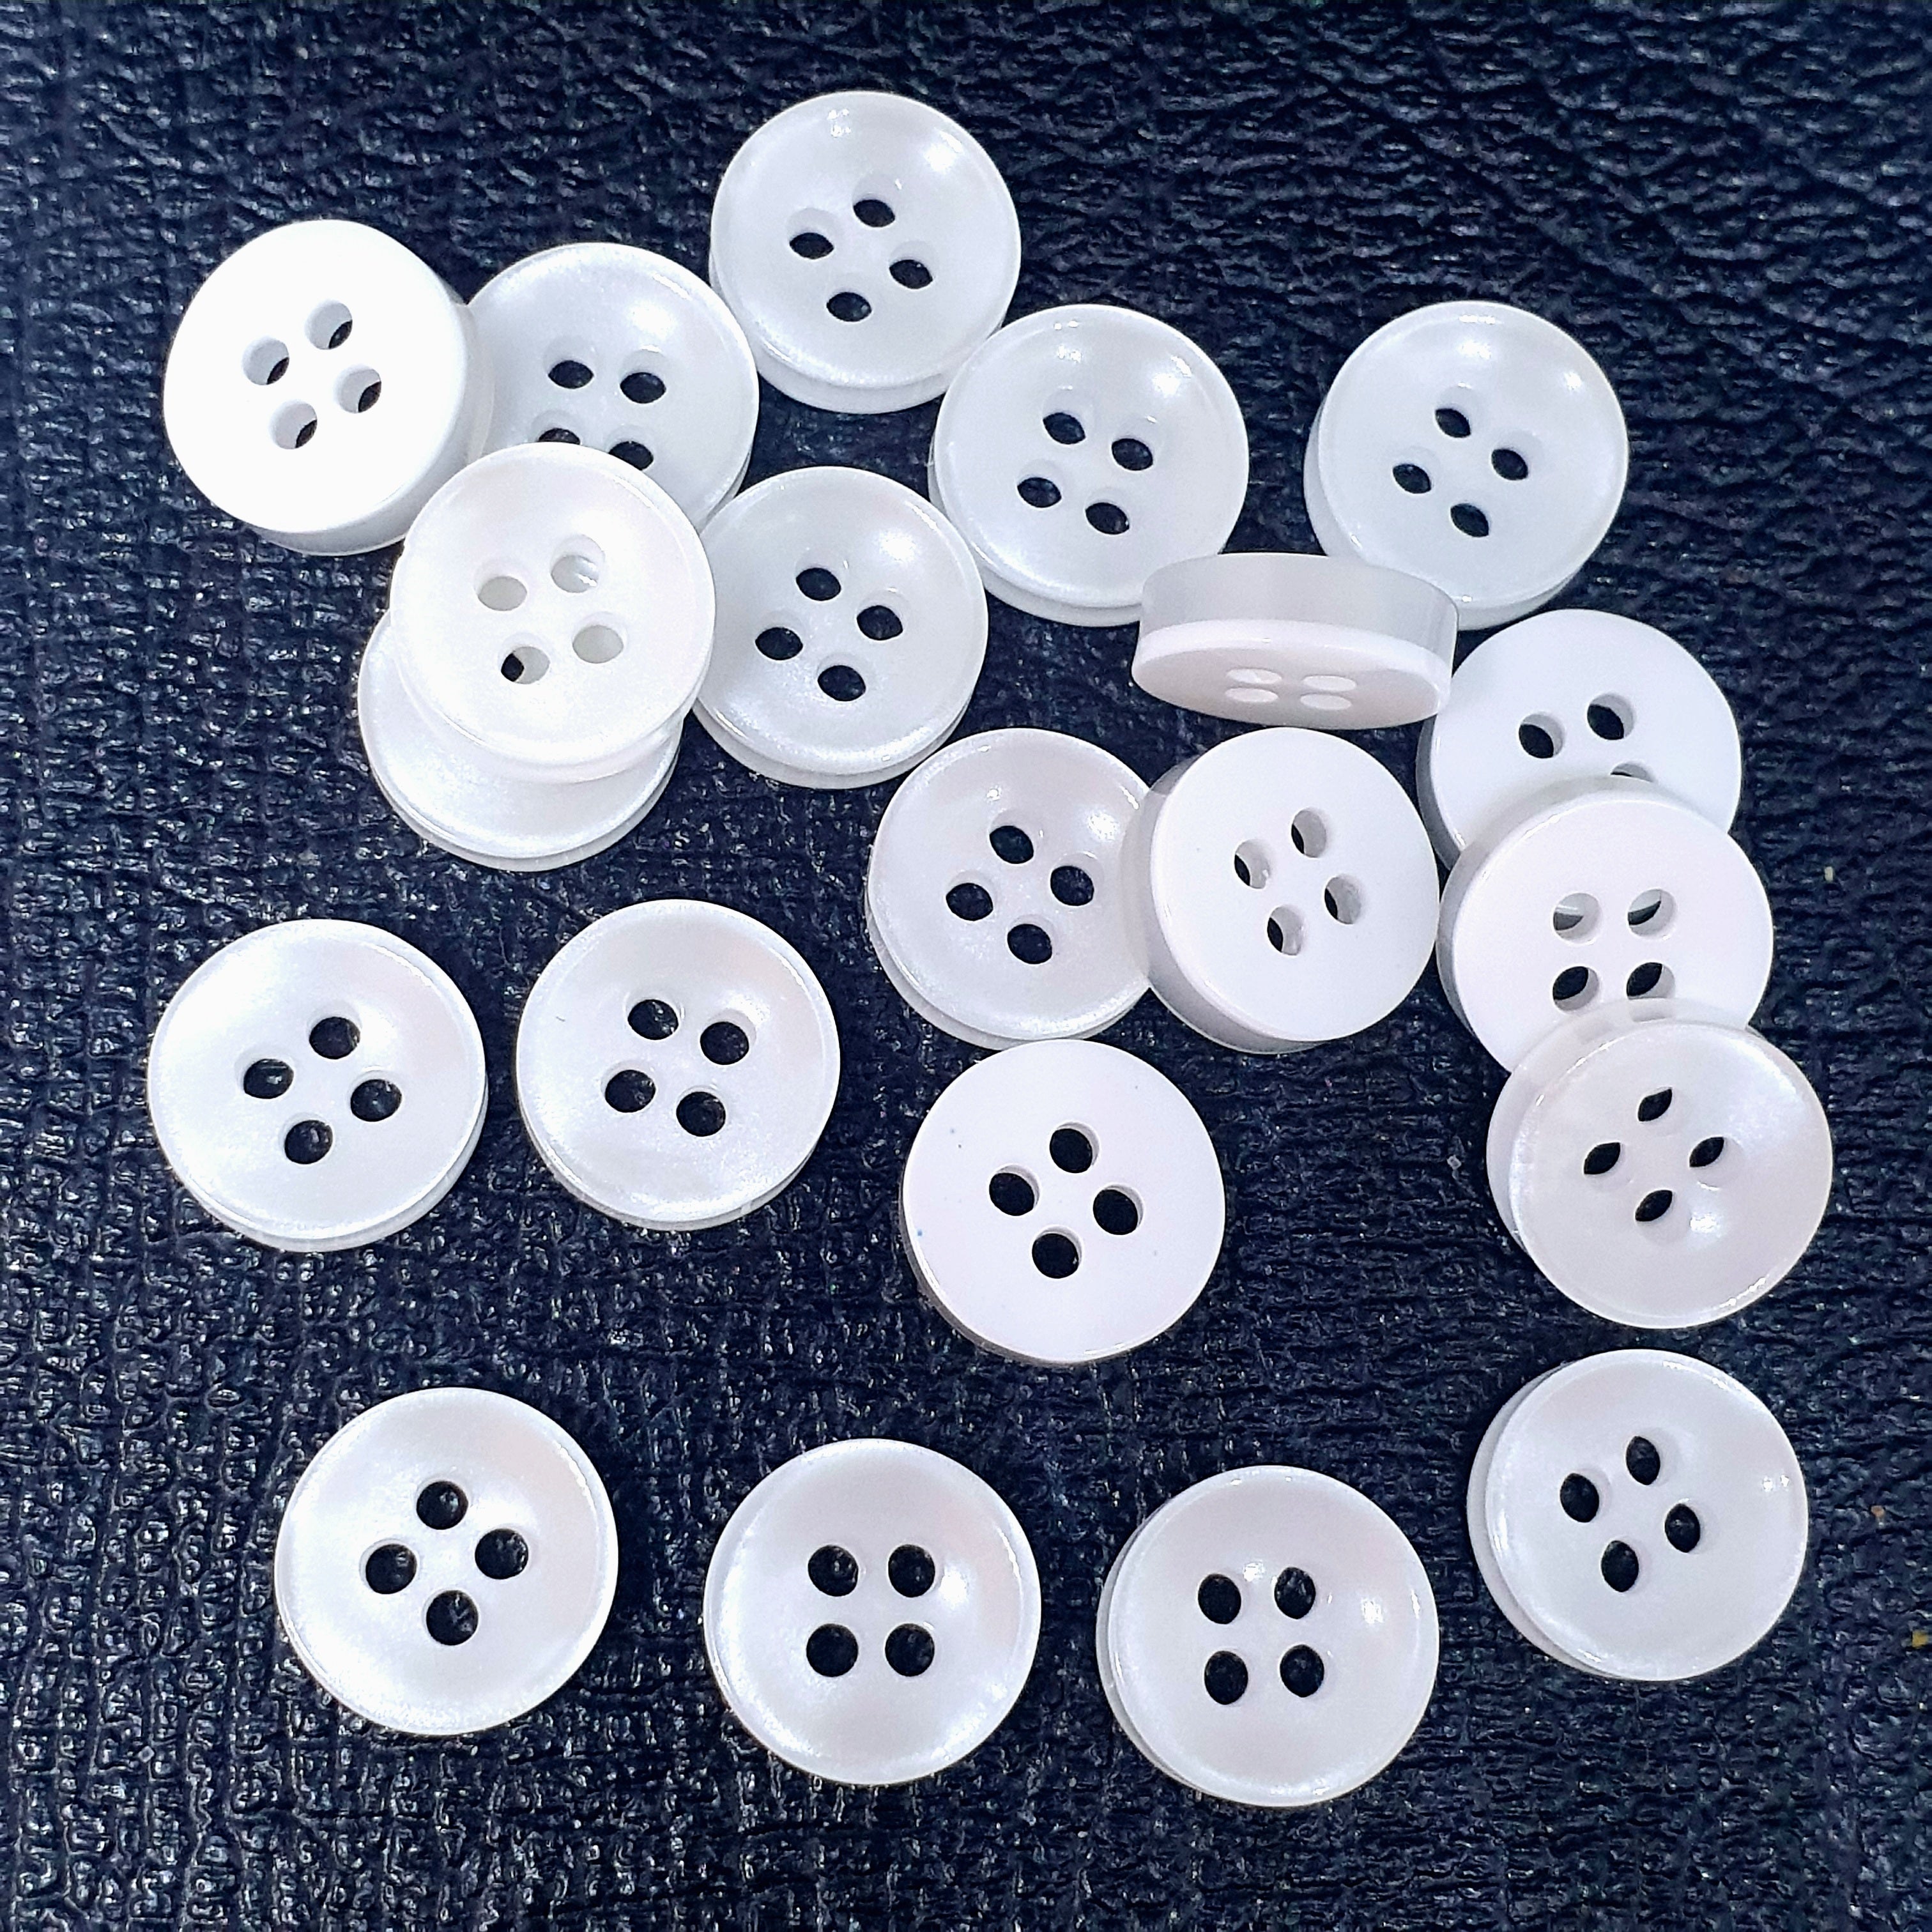 MajorCrafts 80pcs 11.5mm White Pearlescent 4 Holes High-Grade Round Resin Small Sewing Buttons